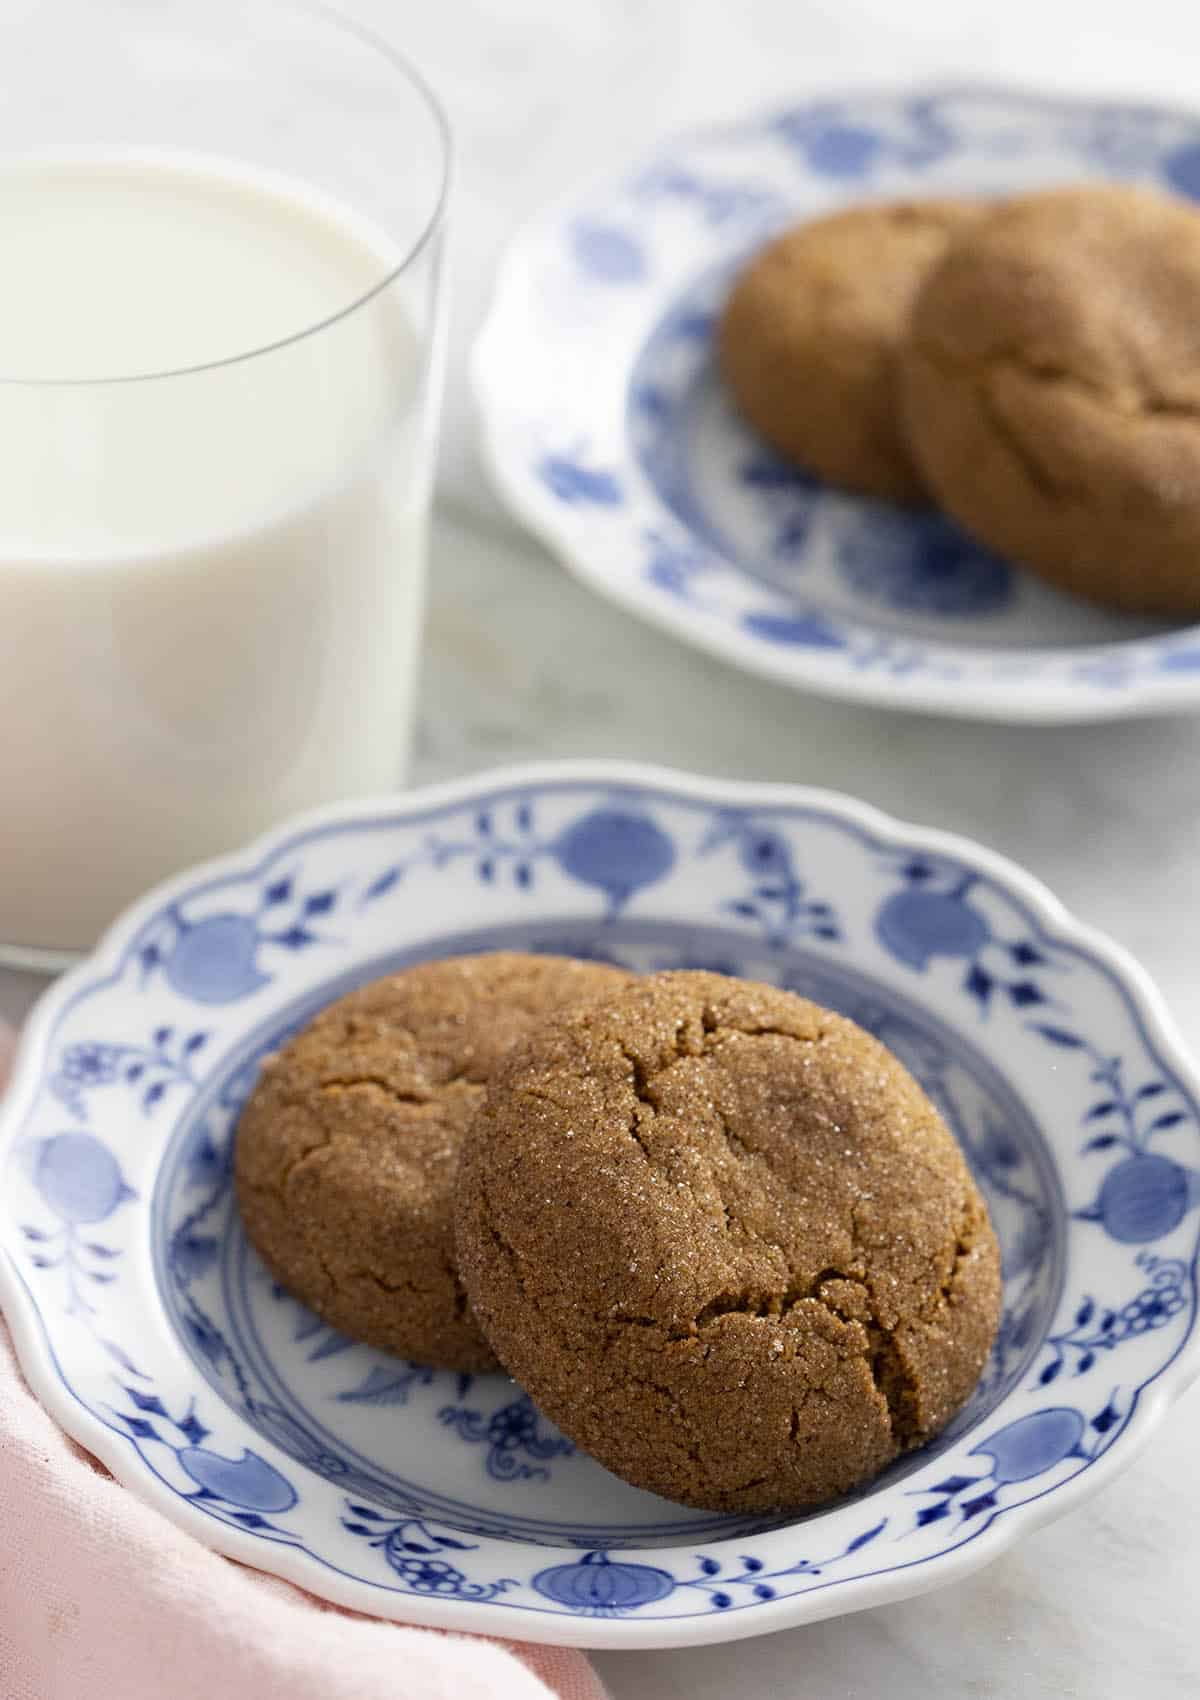 Ginger snap cookies on blue and white plates.